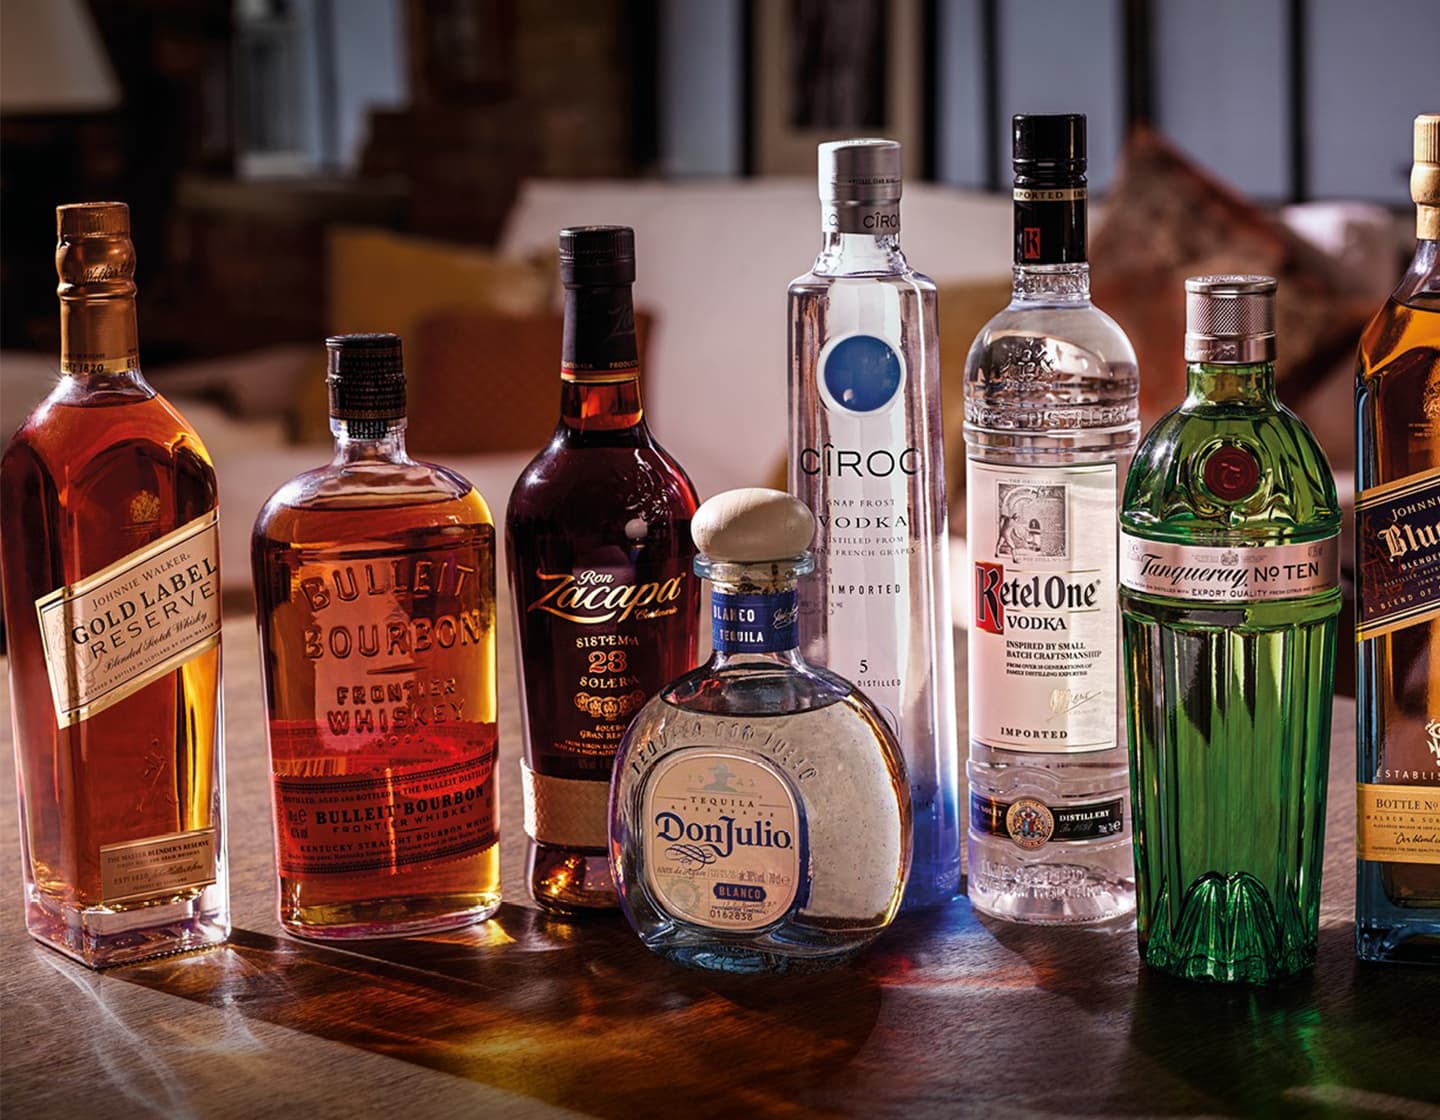 A group of bottles of alcohol, from left to right, Johnnie Walker Gold Label Reserve, Bulleit Bourbon, Zacapa, Don Julio, Cîroc, Ketel One, Tanqueray No Ten and Johnnie Walker Blue Label. 